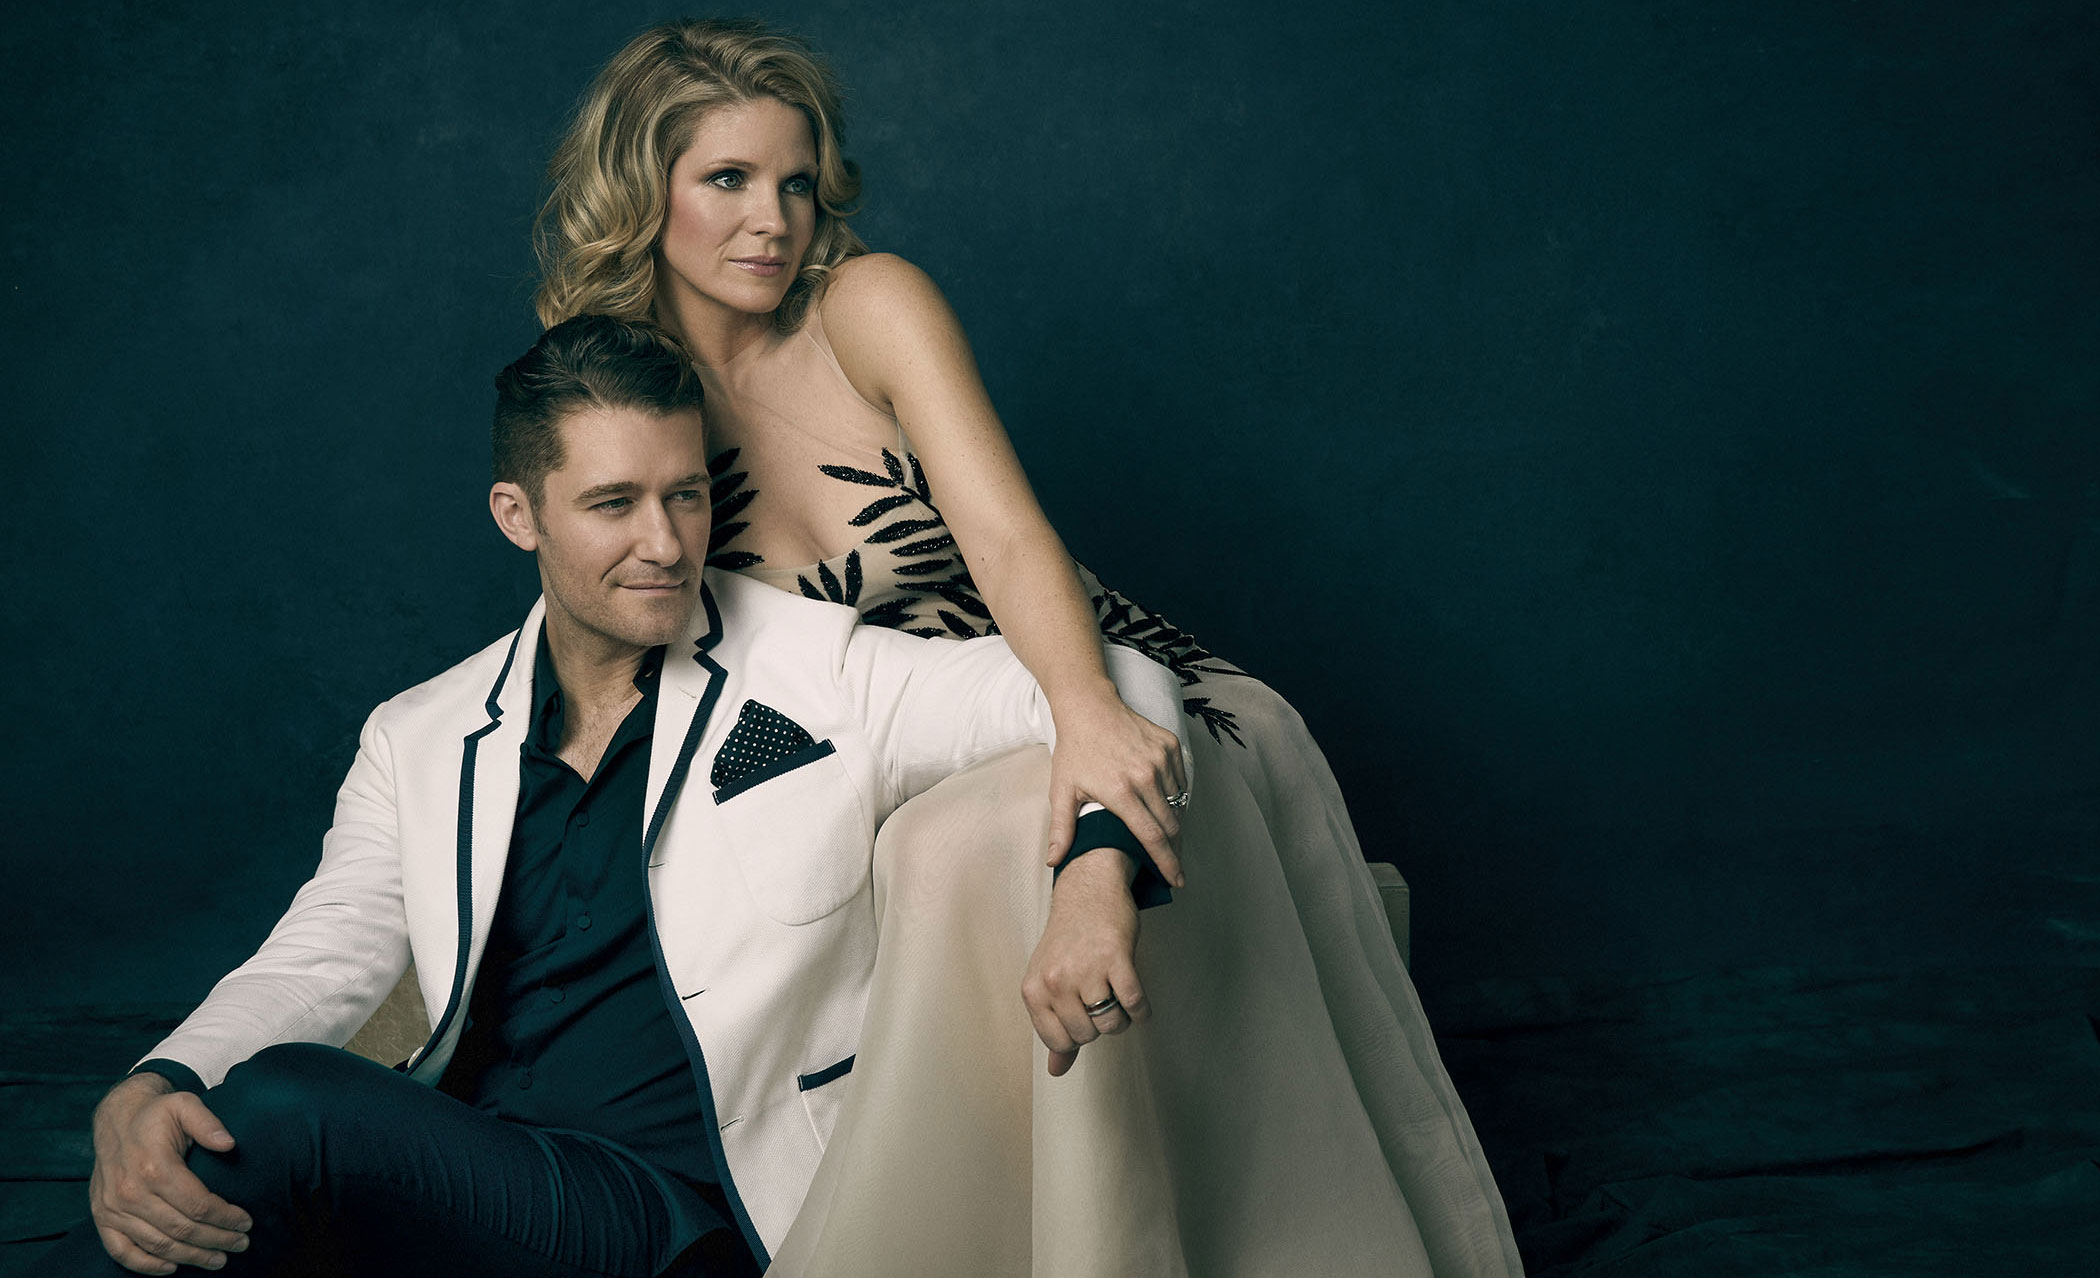 An Evening with Kelli O'Hara and Matthew Morrison at Jorgensen Center For The Performing Arts